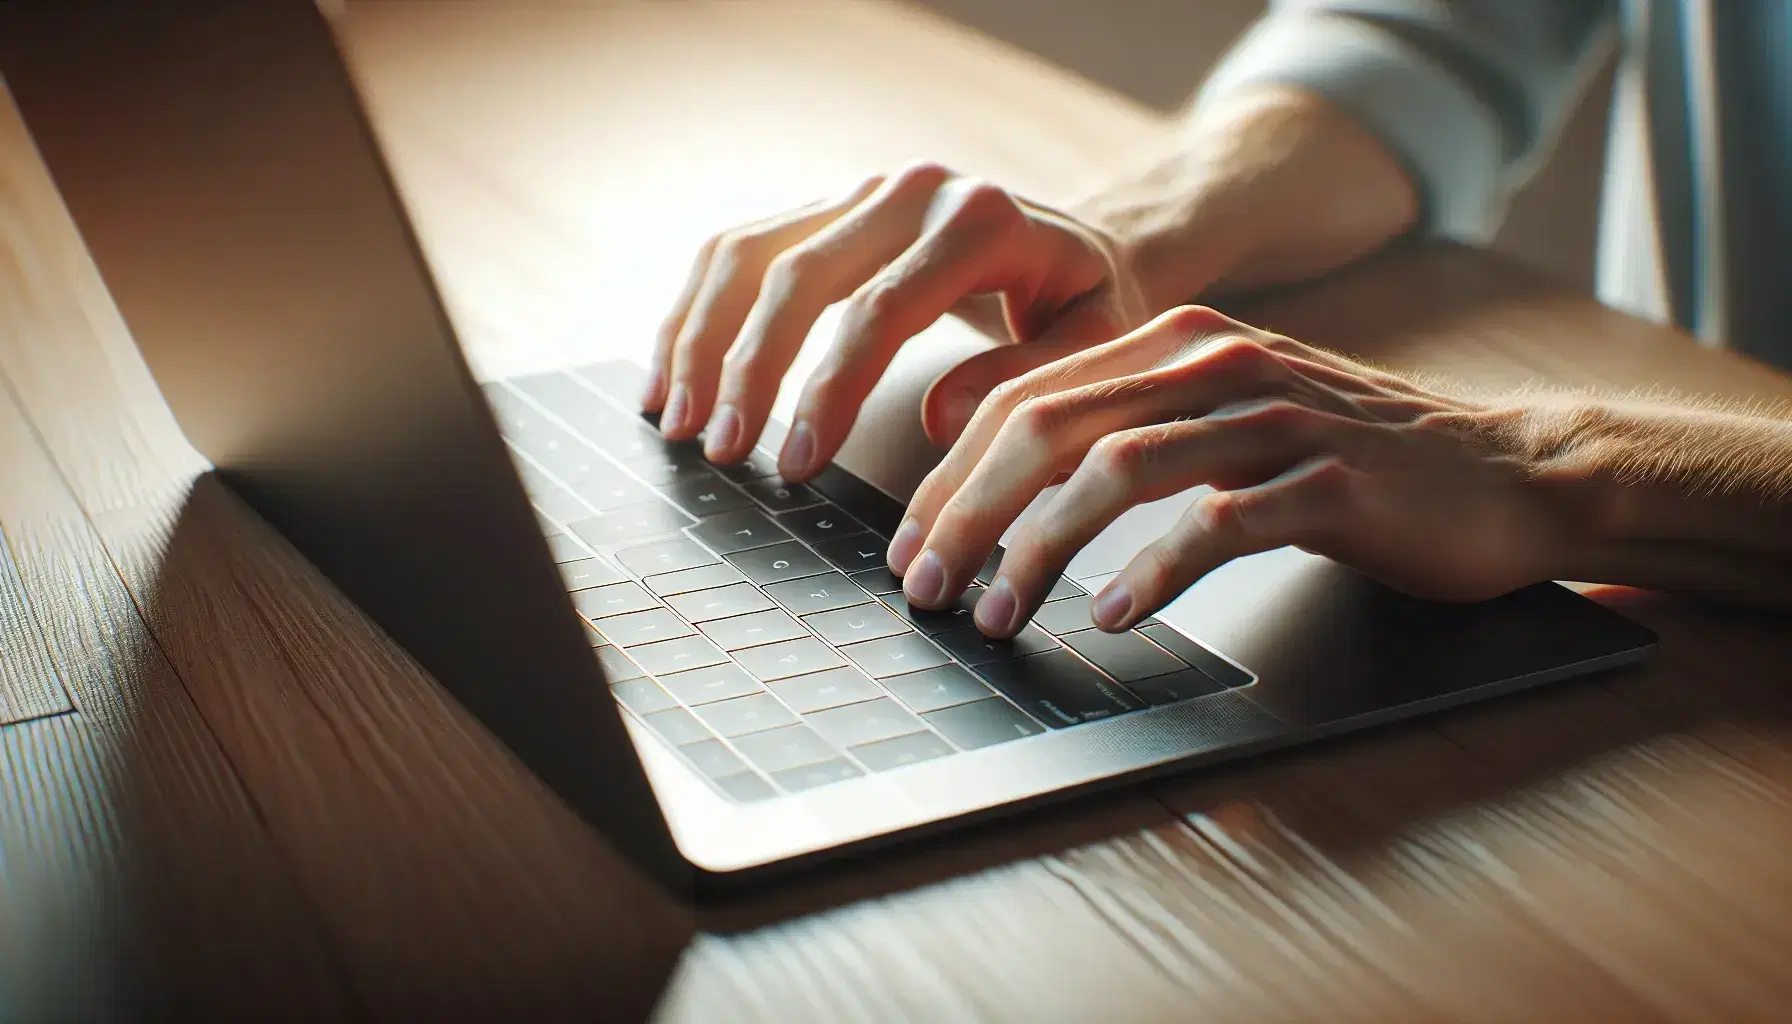 Hands typing on laptop keyboard on wooden desk, correct position for typing, blurred background with warm lighting.